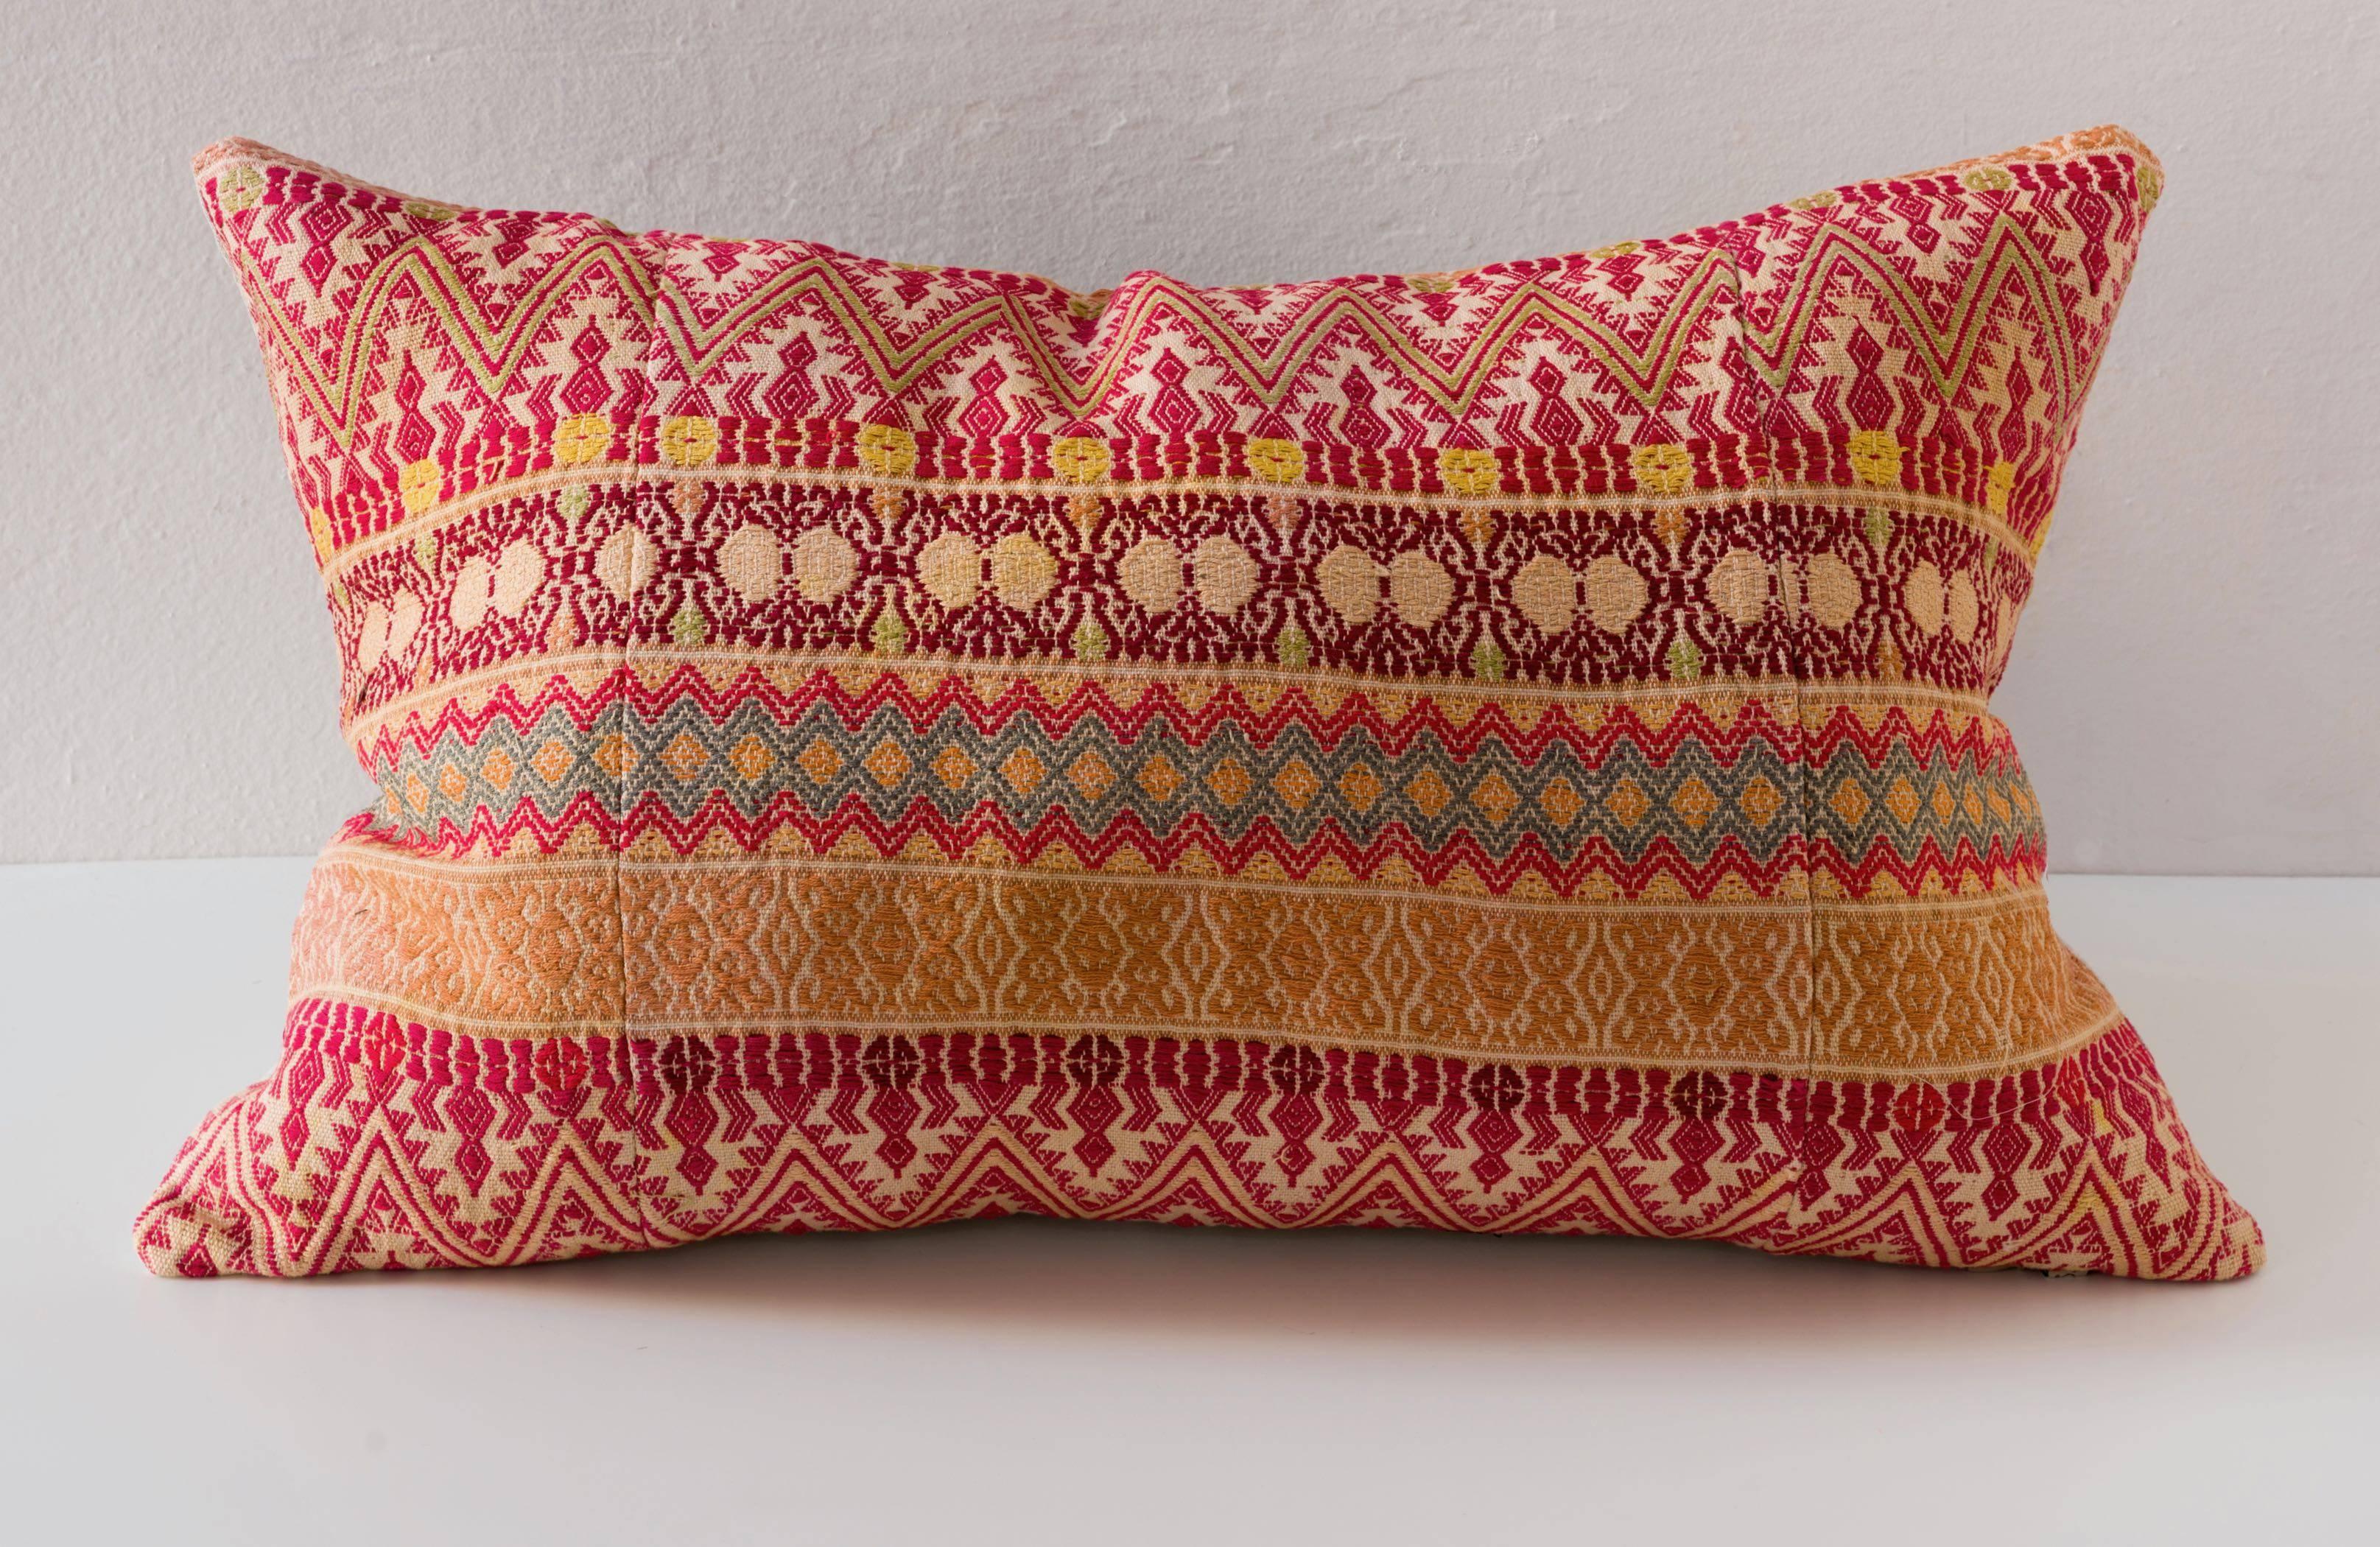 Pillows made from a contemporary hand loomed textile from Mitla, Oaxaca.  Mitla has one of the most important  archeological sites to the Zapotec culture. This textile is artisan made, in a a zig zag motif. 

Linen on reverse. See image
75/25 goose